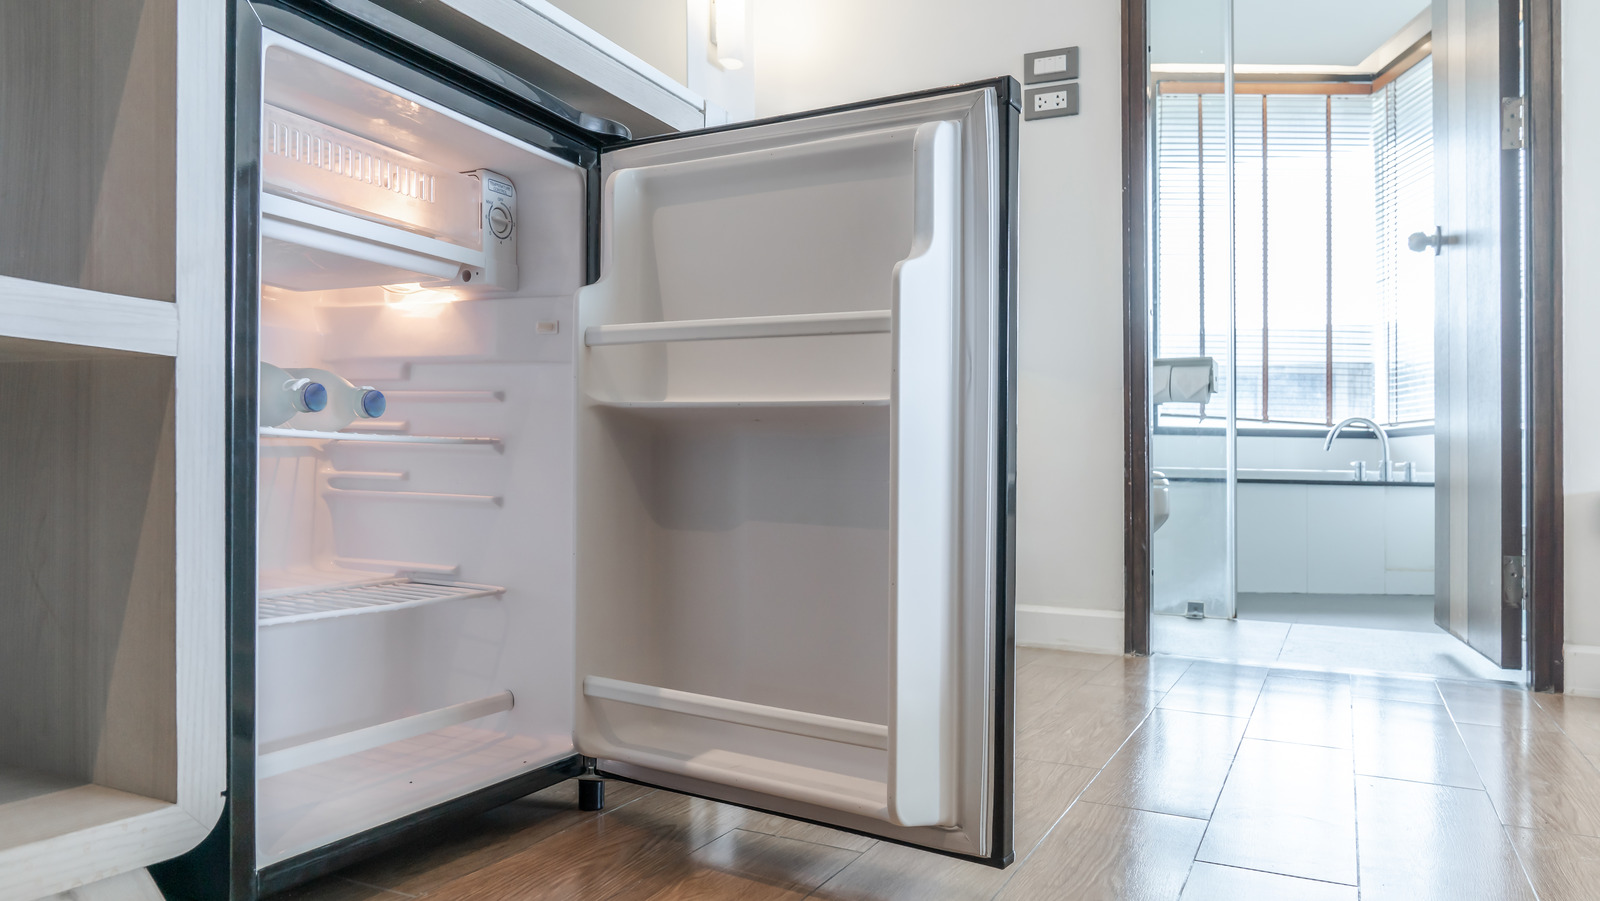 The Mini Fridge Costco Shoppers Are Freaking Out About